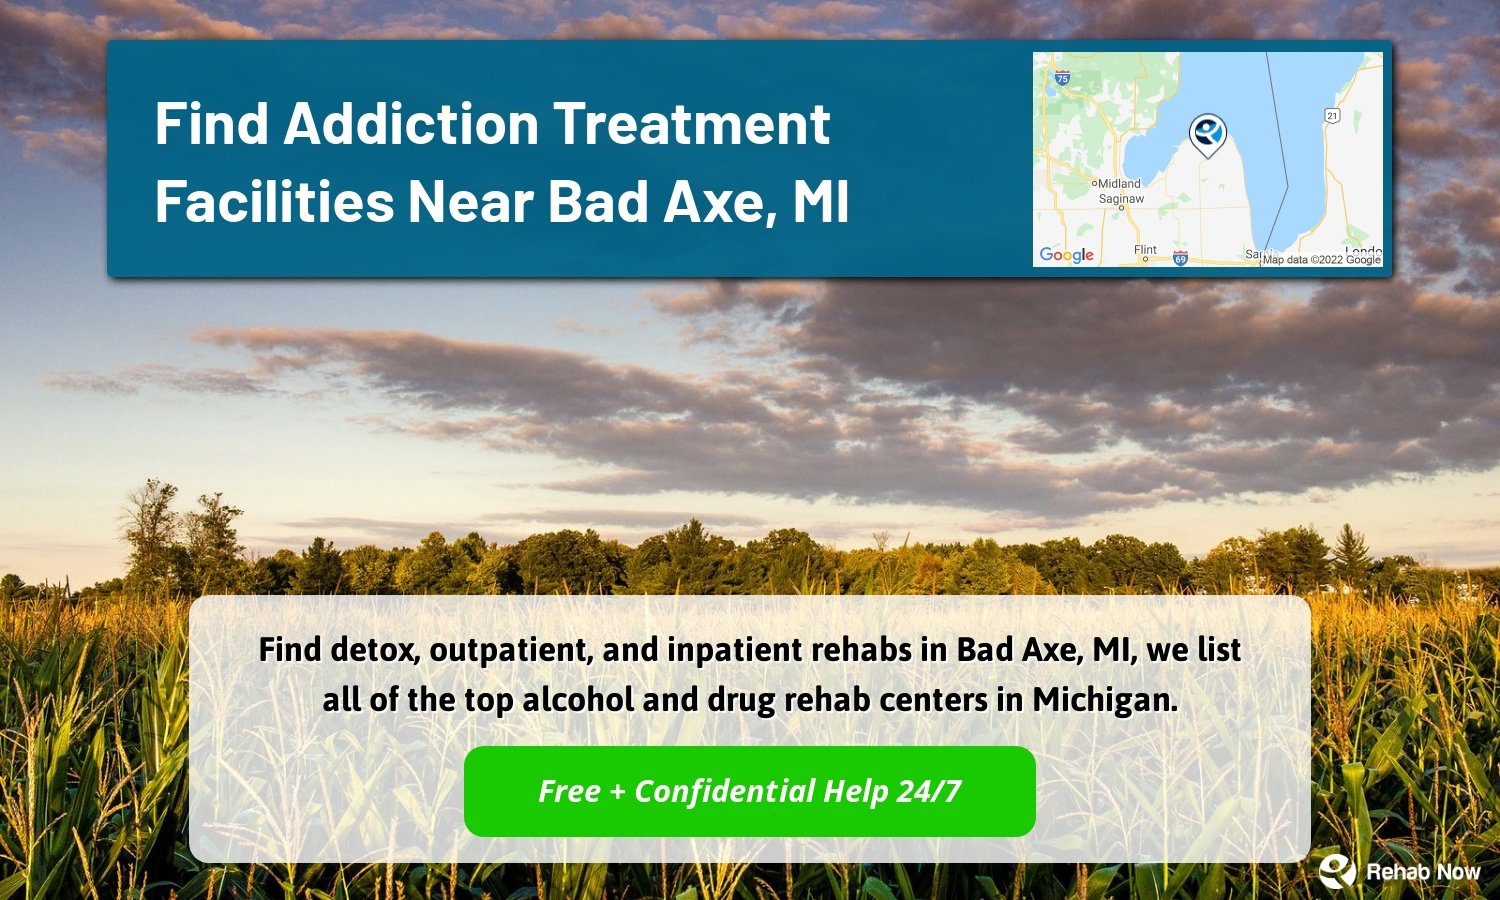 Find detox, outpatient, and inpatient rehabs in Bad Axe, MI, we list all of the top alcohol and drug rehab centers in Michigan.